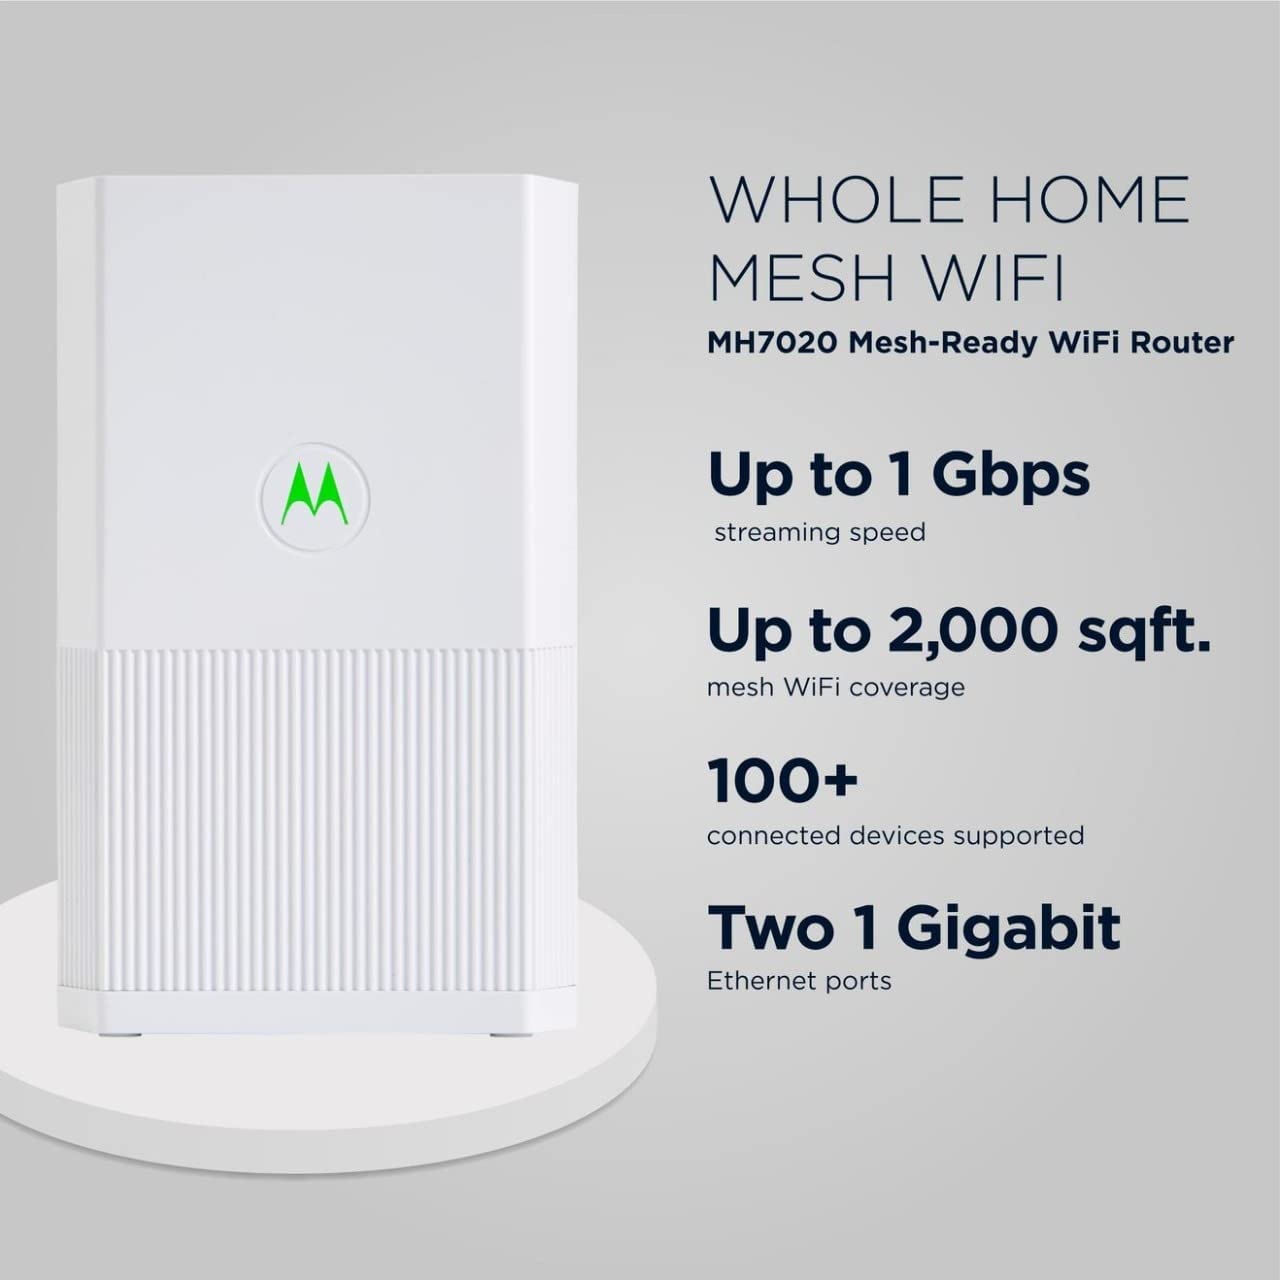 Motorola Gigabit Smart Home WiFi Router Coverage up to 2000 sq ft | WiFi Mesh System Compatible | AC2200 WiFi | Fast Setup, Security, Adblocking + Parental Controls with The Motosync app - image 2 of 7